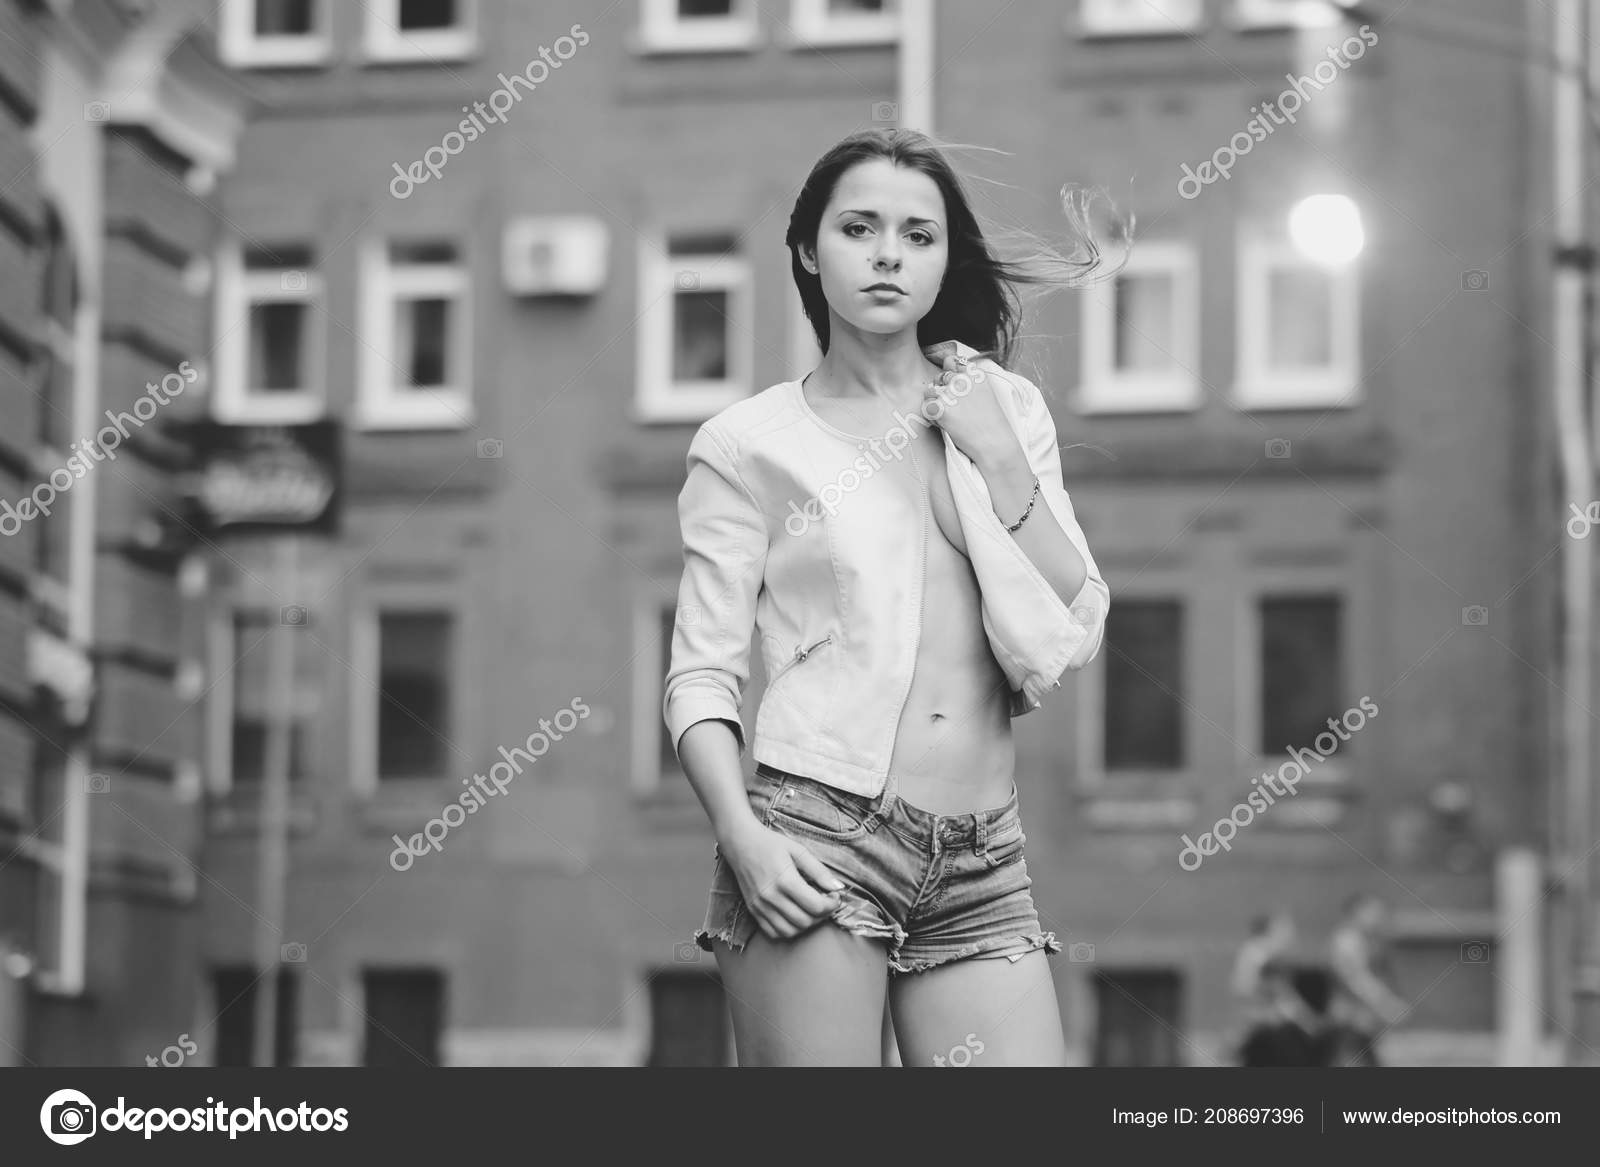 Black And White Pics Hot Sexy - Hot sexy redhair woman in the city. Half naked girl. Black ...